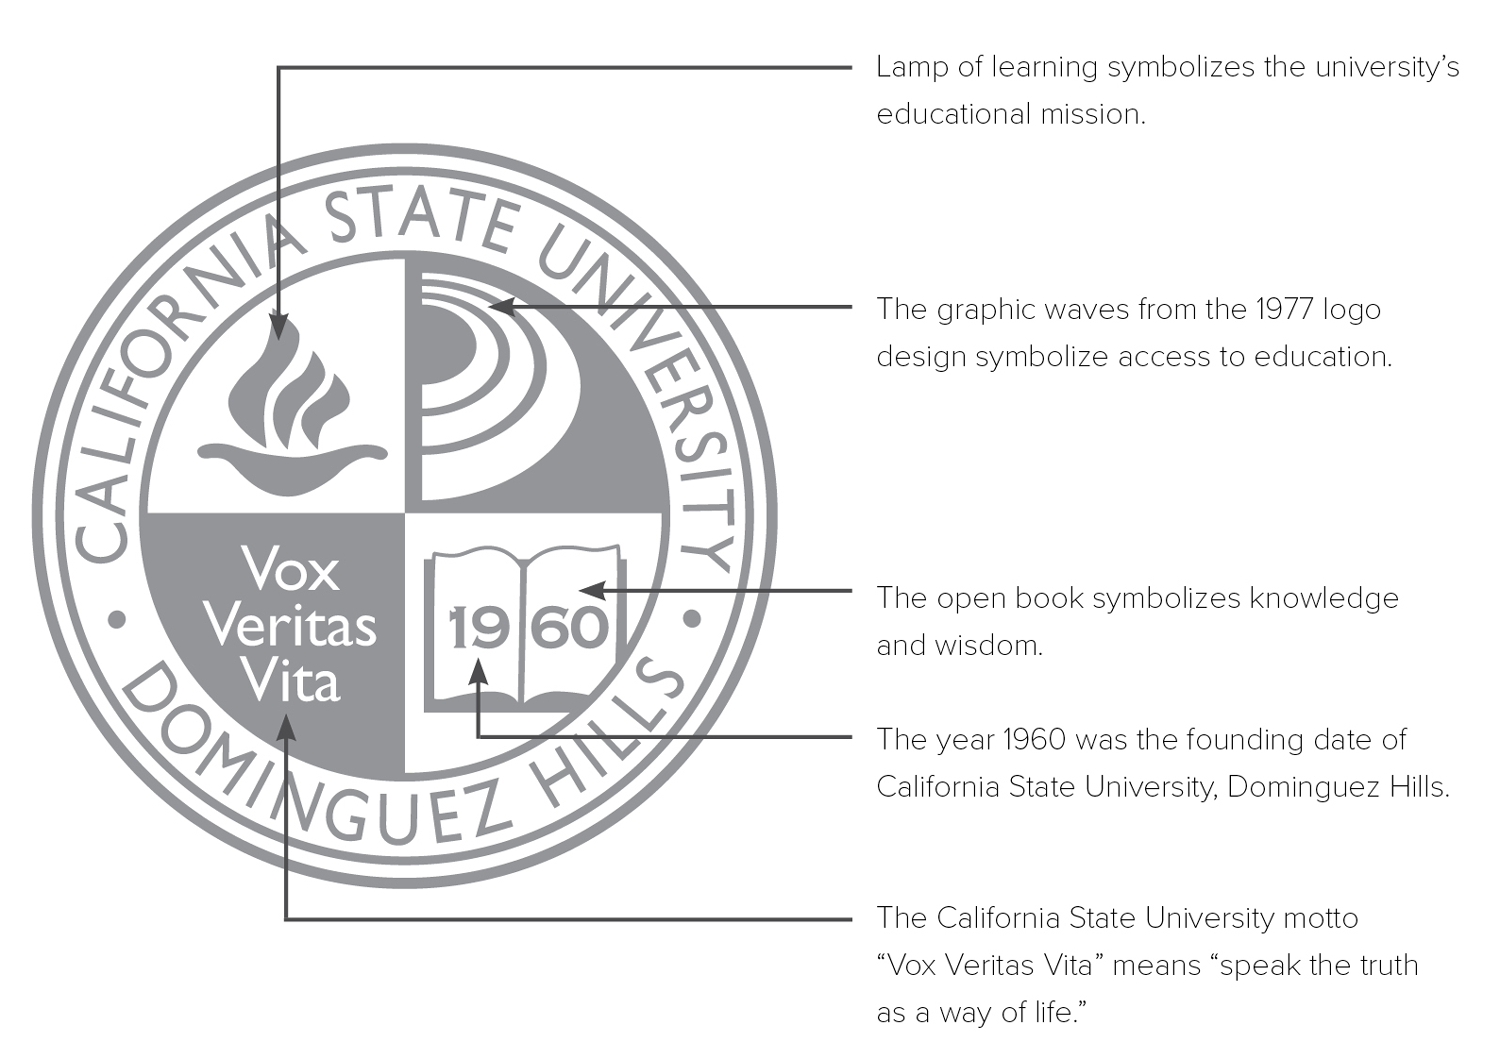 University Seal Symbolism. Lamp of learning, waves from 1977 logo, 1960 our founding year, Vox Vertas Vita - speak the truth